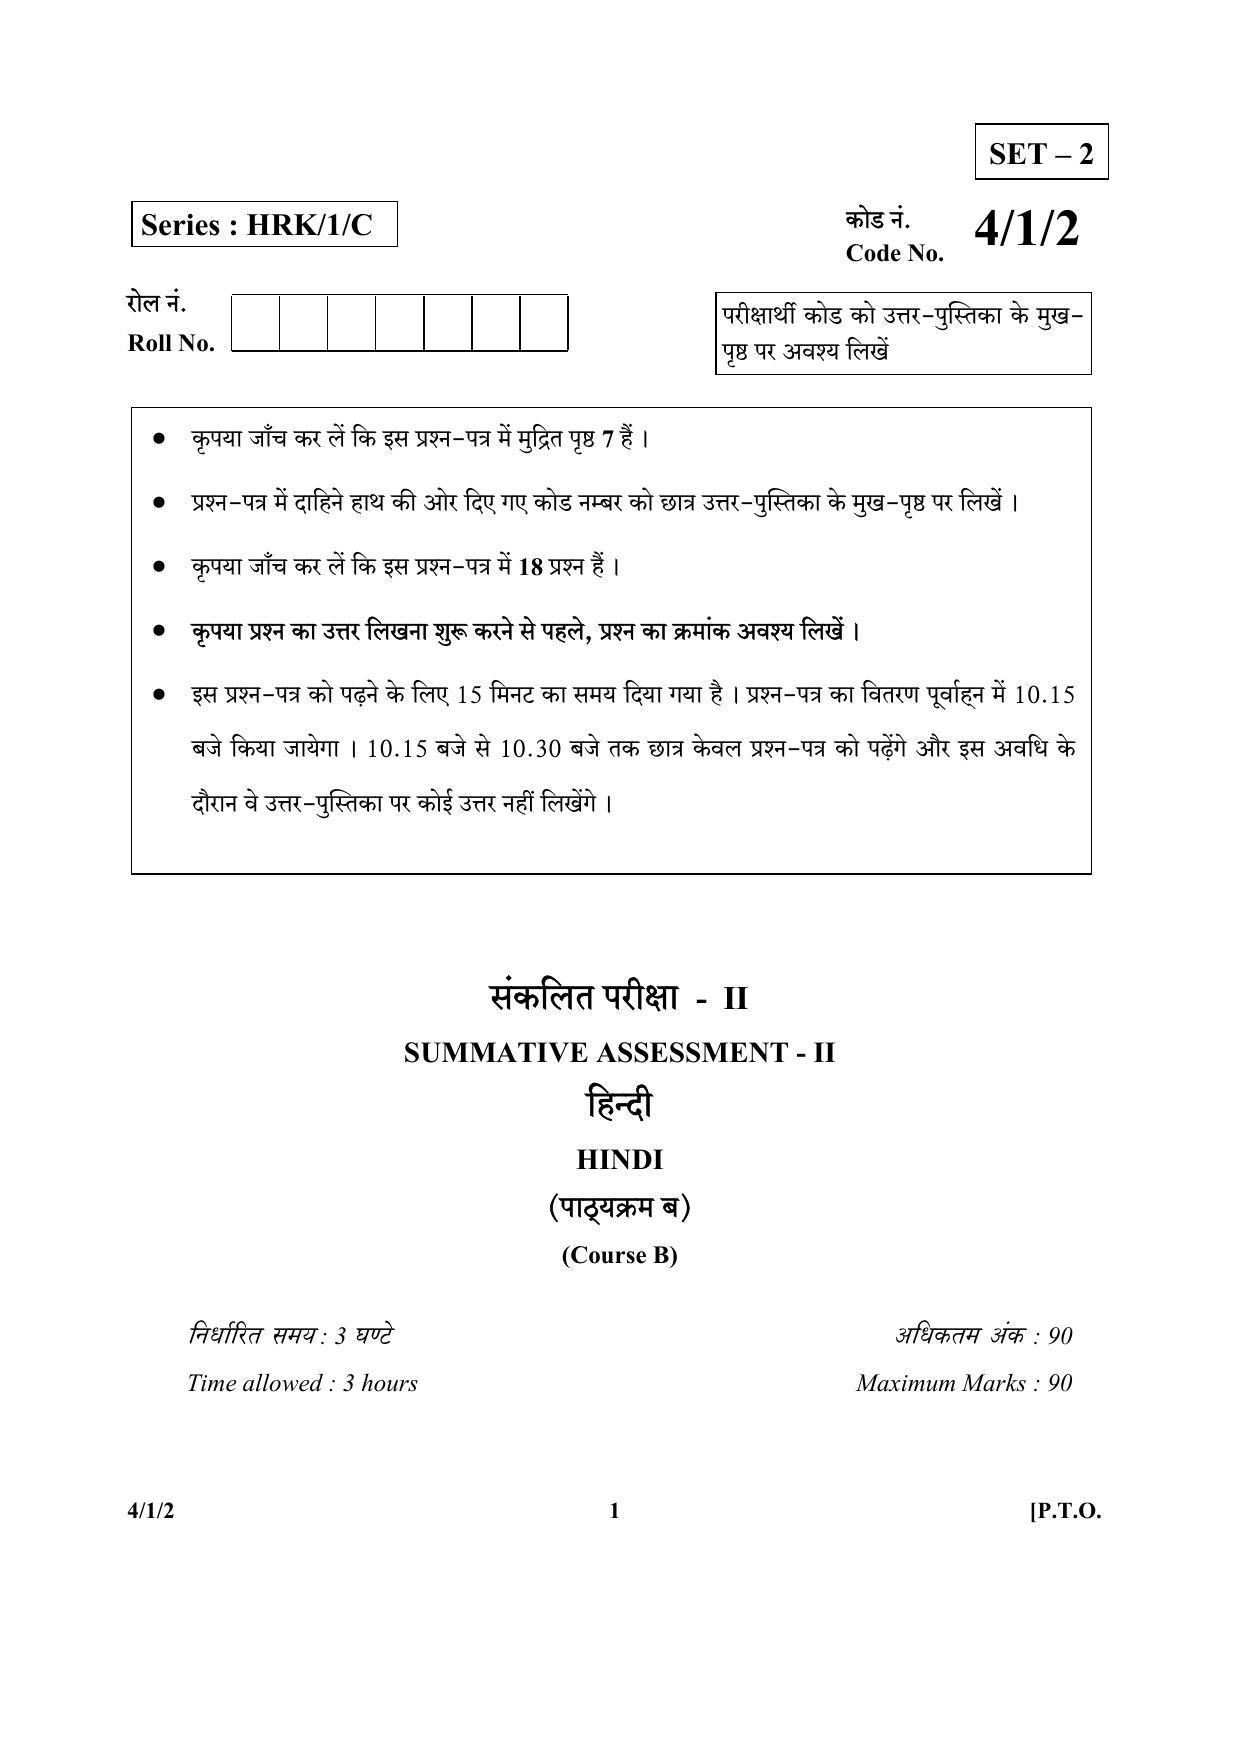 CBSE Class 10 4-1-2_Hindi 2017-comptt Question Paper - Page 1